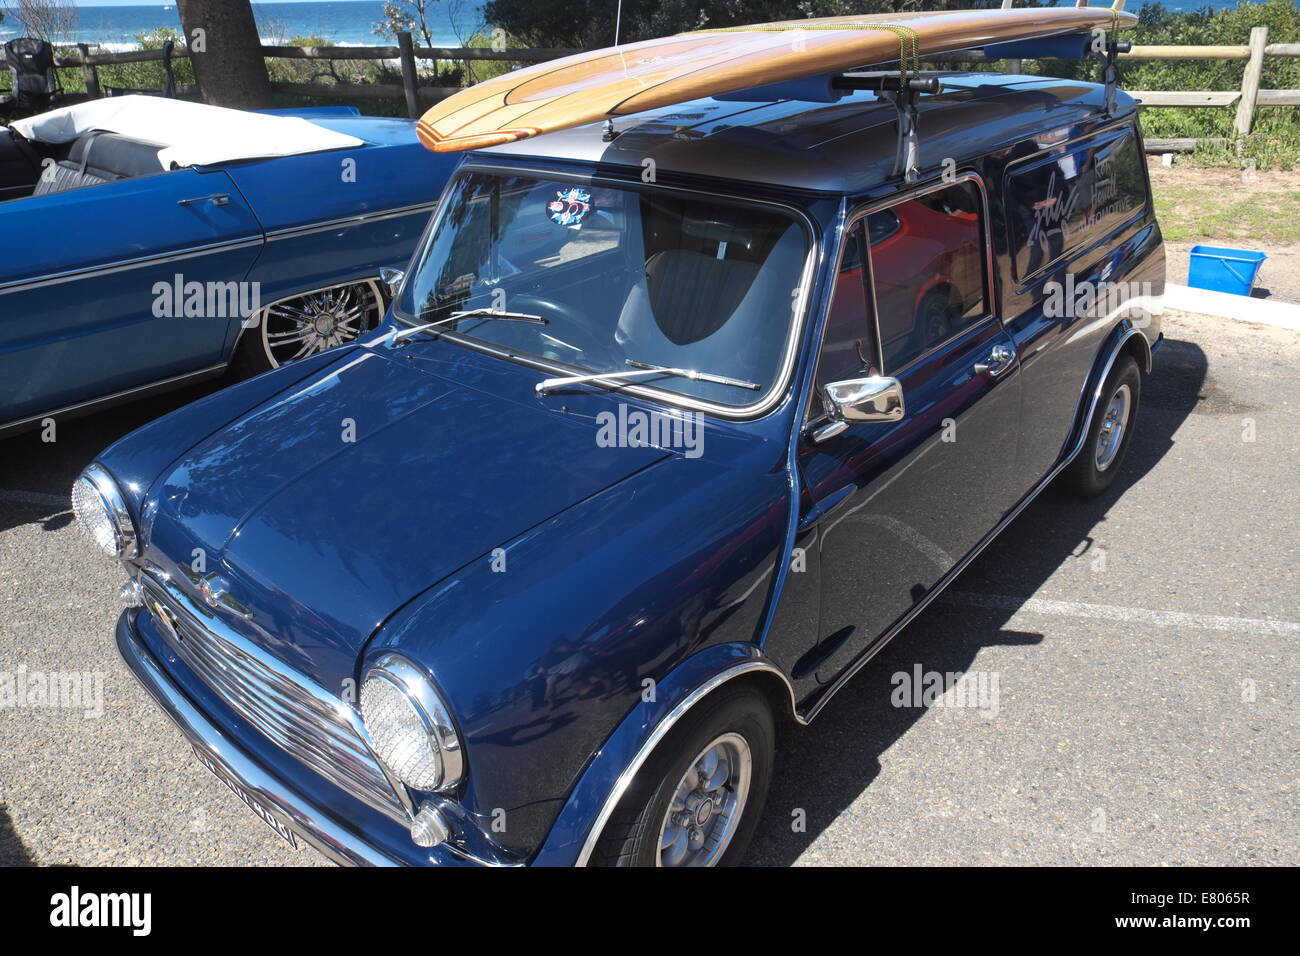 Newport Beach, Sydney, Australia. 27th Sep, 2014. Classic cars on display at Sydney's Newport Beach. Here a Mini Countryman estate complete with surfboard. Credit:  martin berry/Alamy Live News Stock Photo